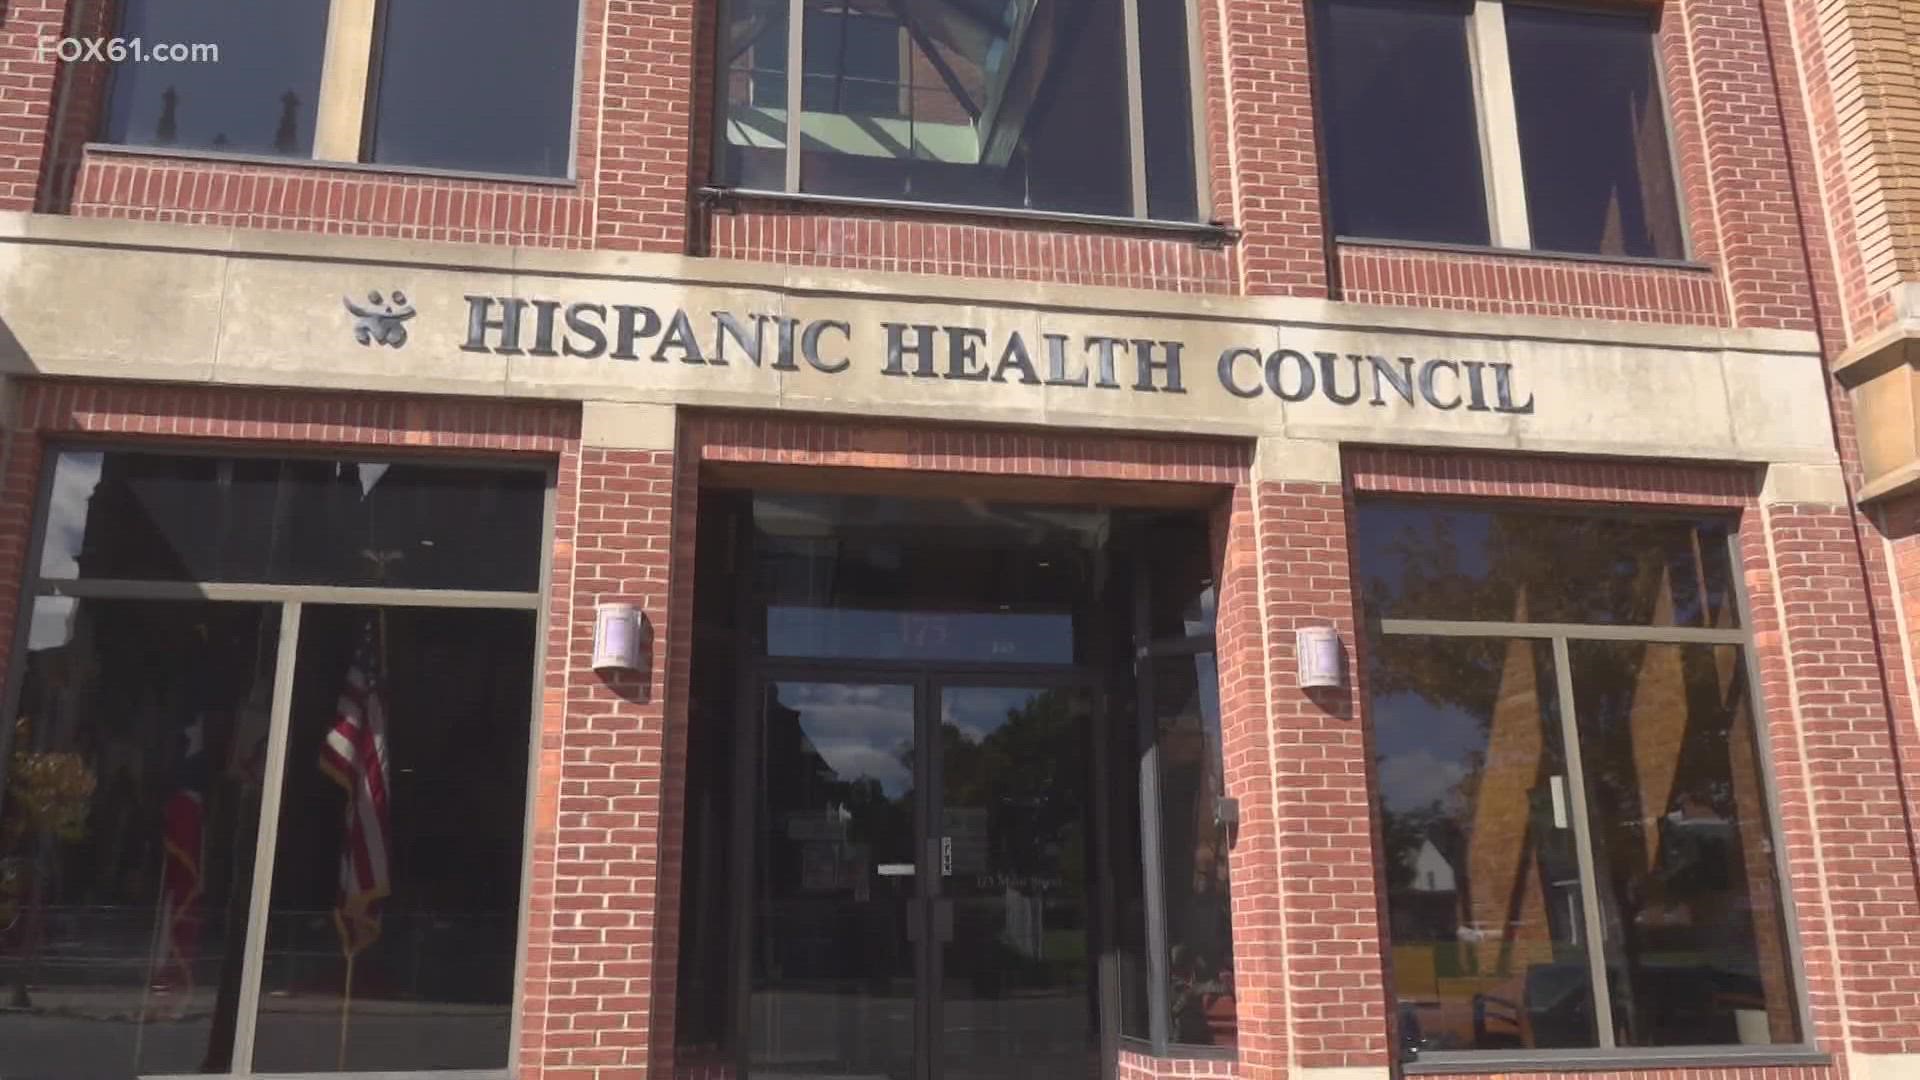 The Hisp[anic Health council promotes health equity while addressing health disparities.